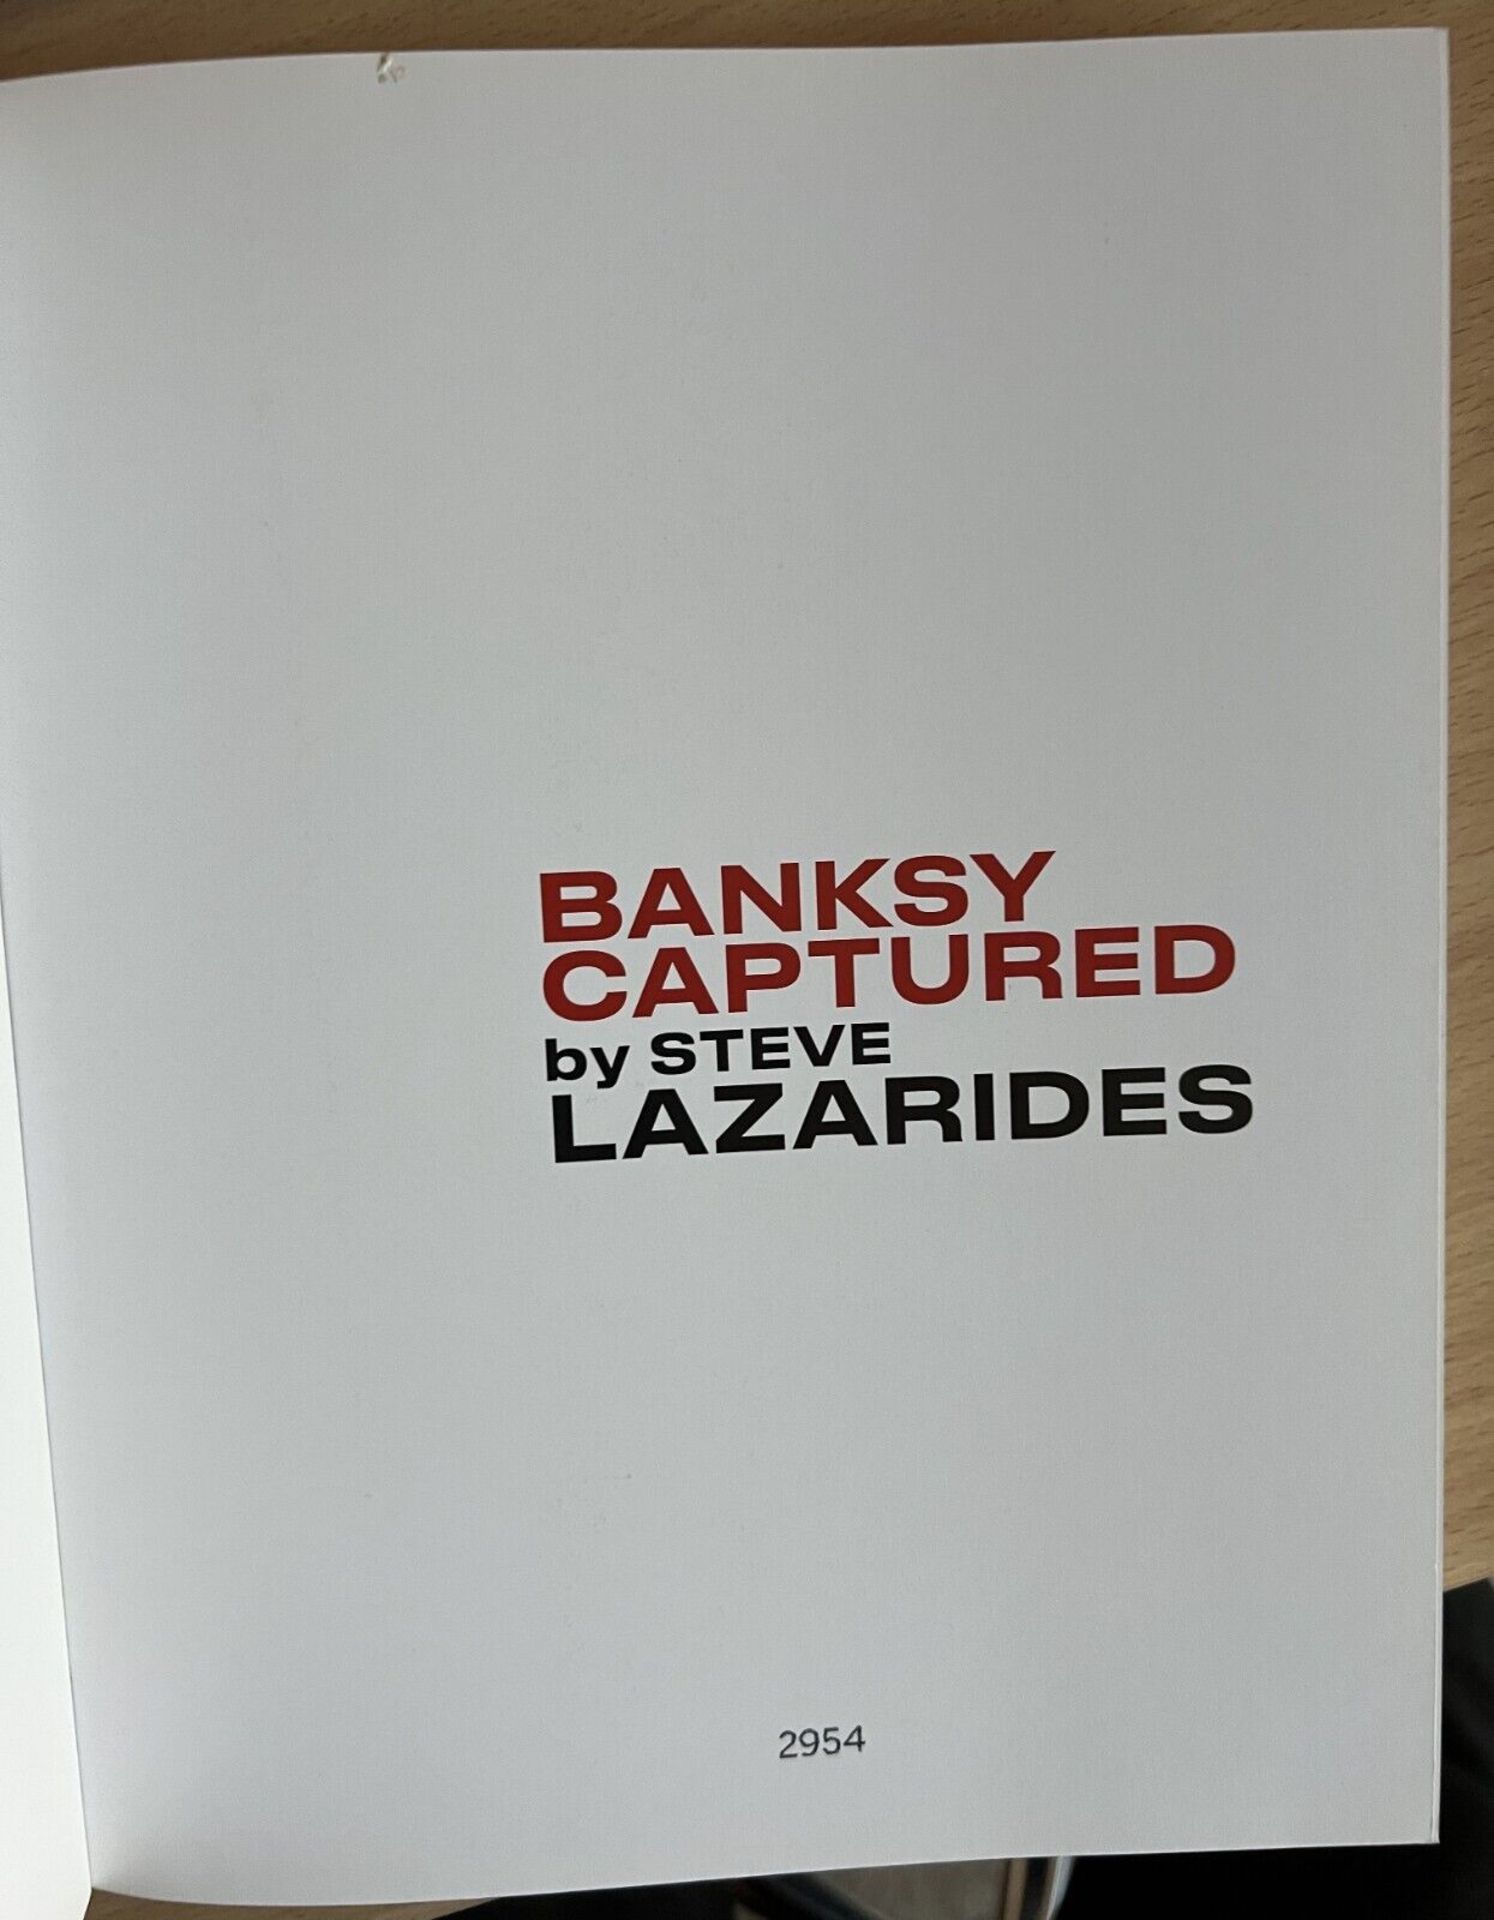 Banksy Captured, Vol 1 By Steve Lazarides, 1st Edition, Numbered 2954/5000, 256 Pages 2109, SOLD OUT - Image 15 of 15